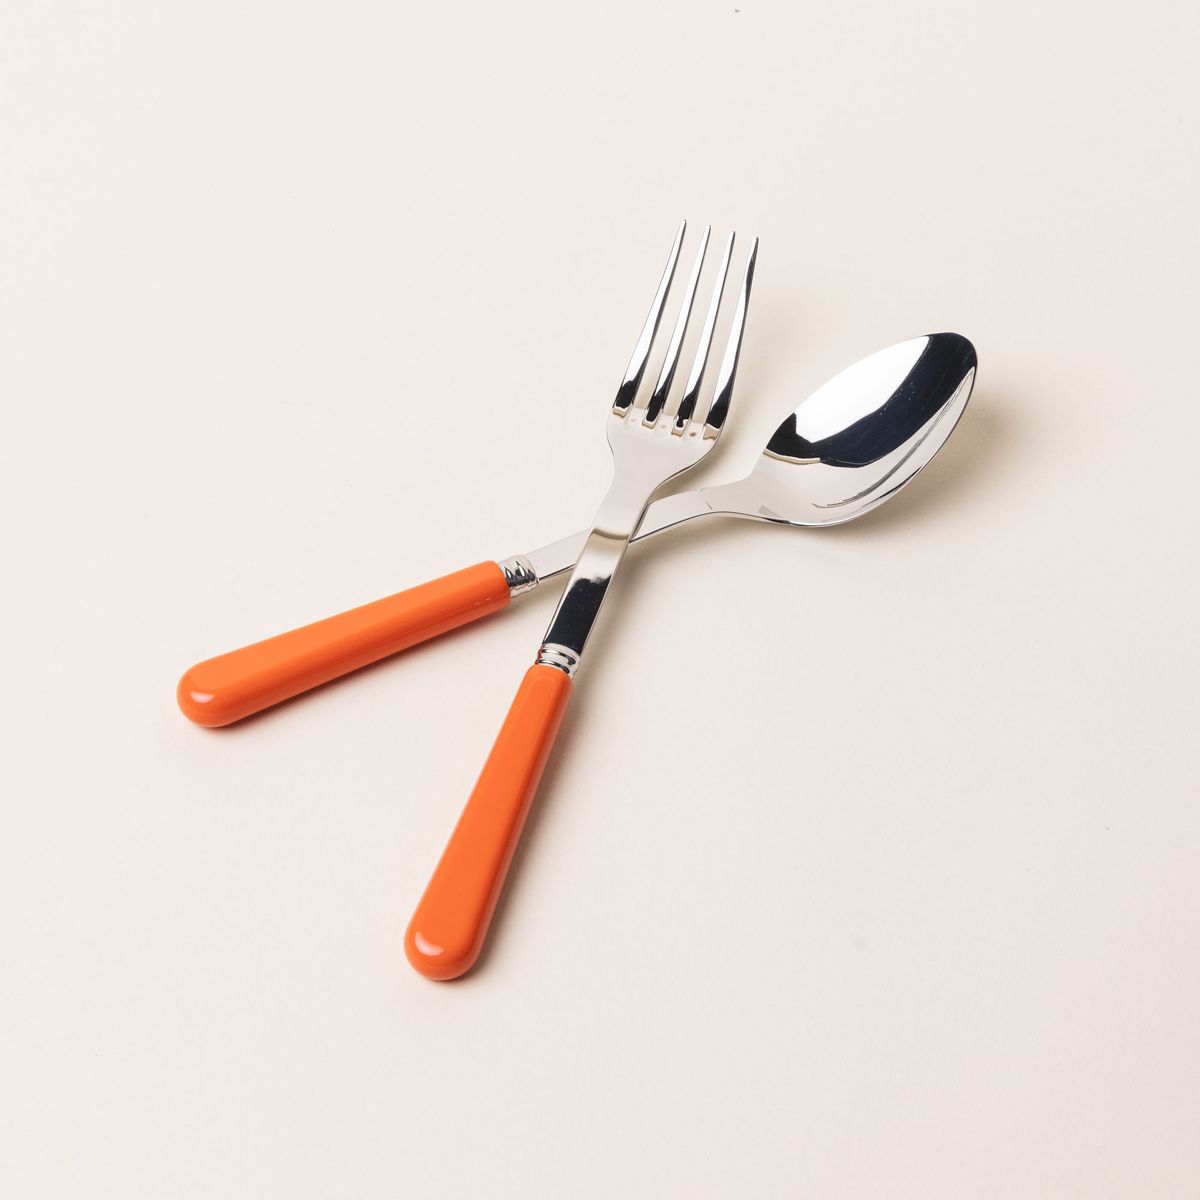 A serving size spoon and fork in a shiny steel with a bold orange handle